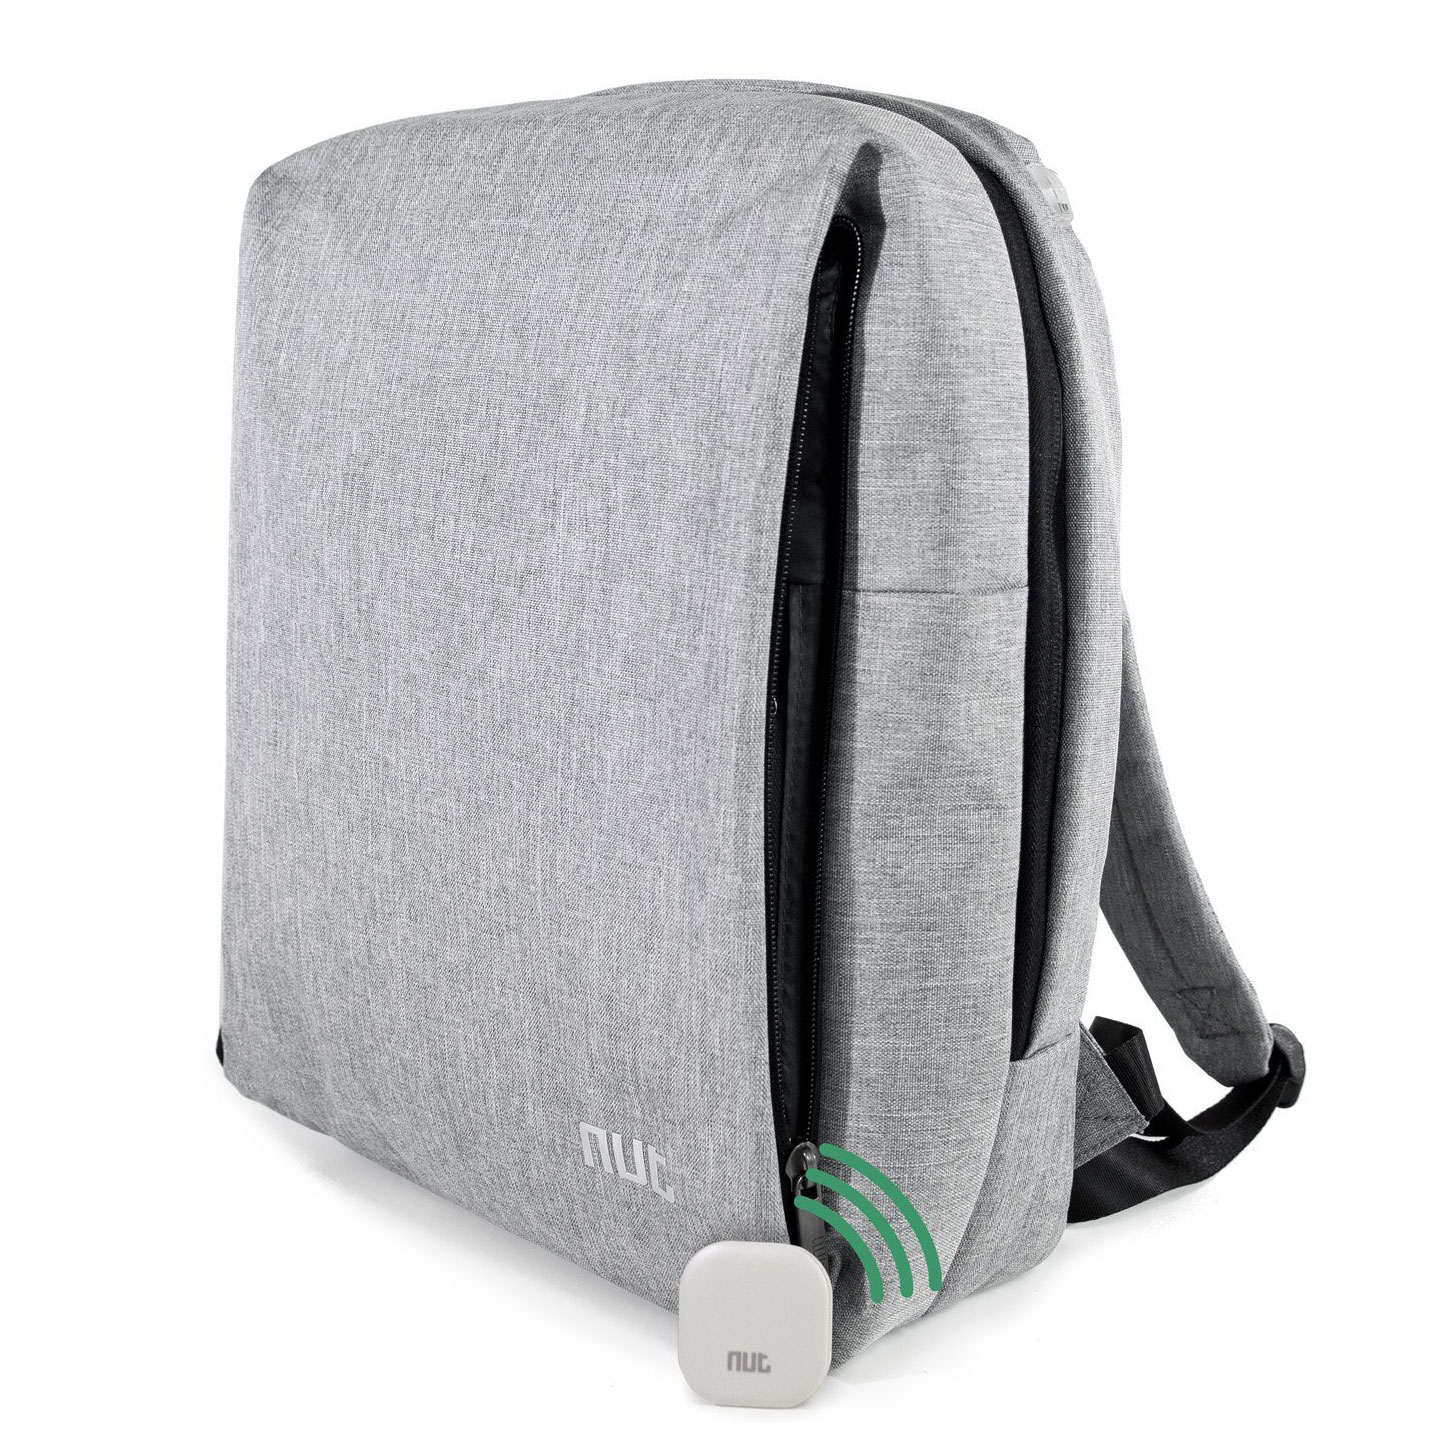 Daypack Backpack mit Bluetooth Modul